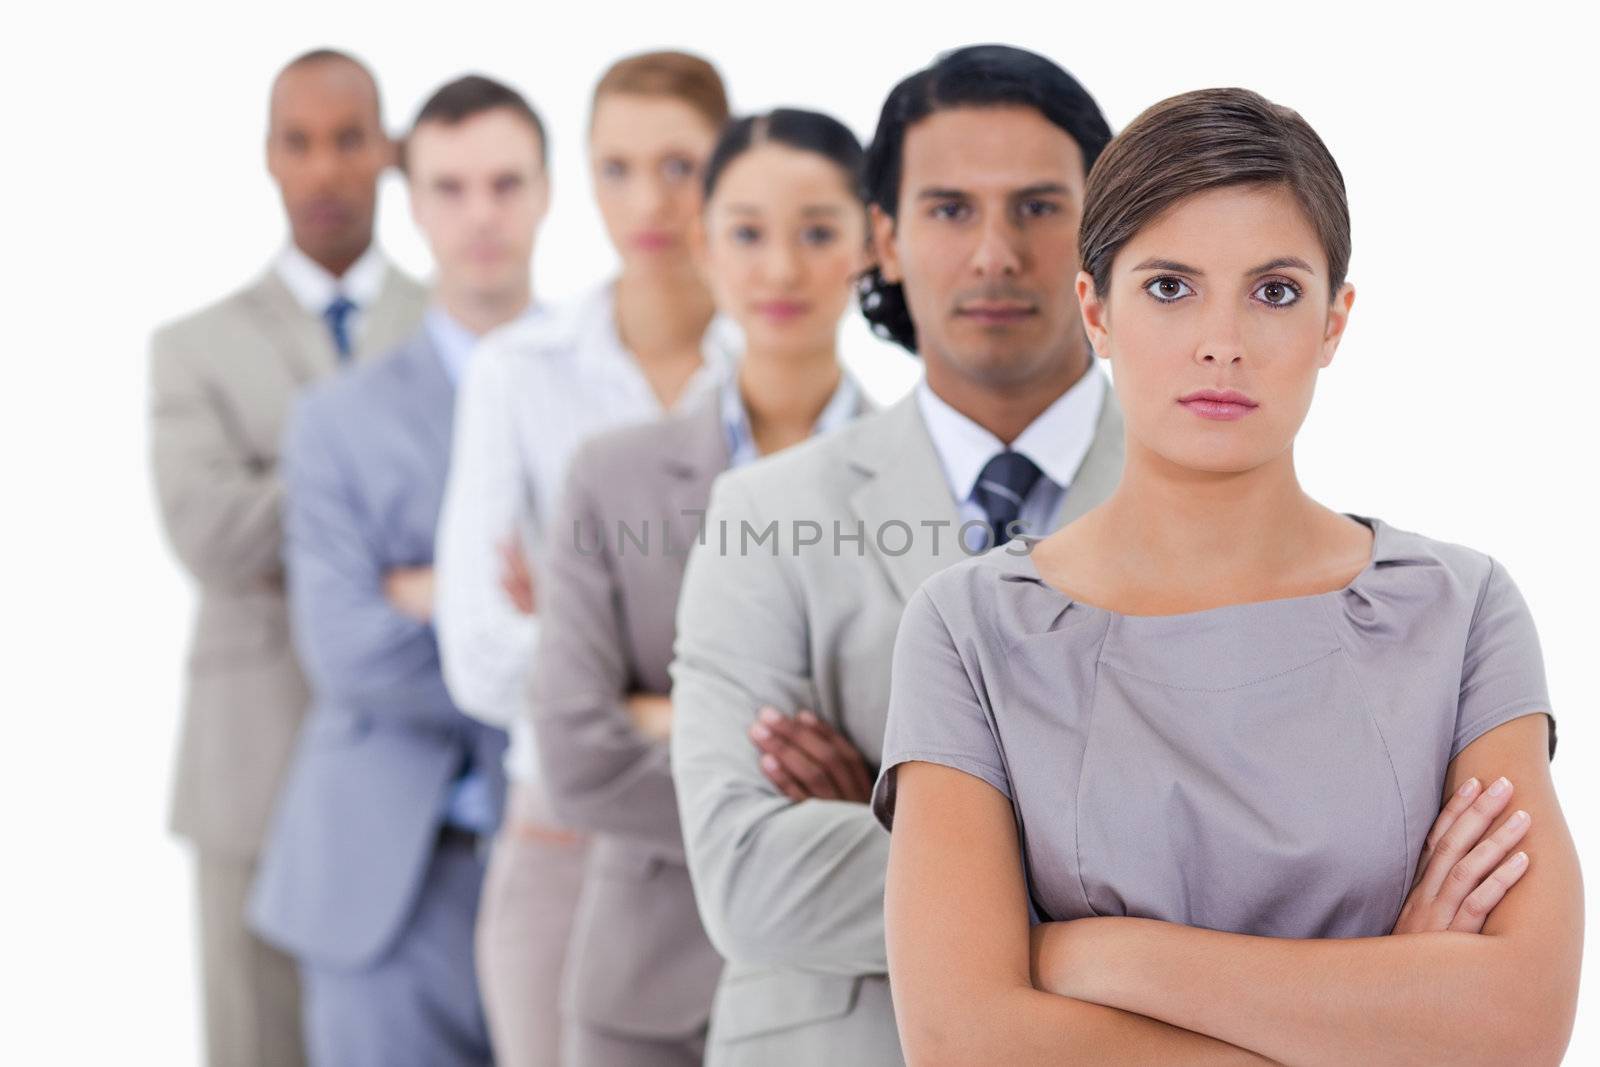 Big close-up of serious workmates in single a line crossing their arms with focus on the first woman 